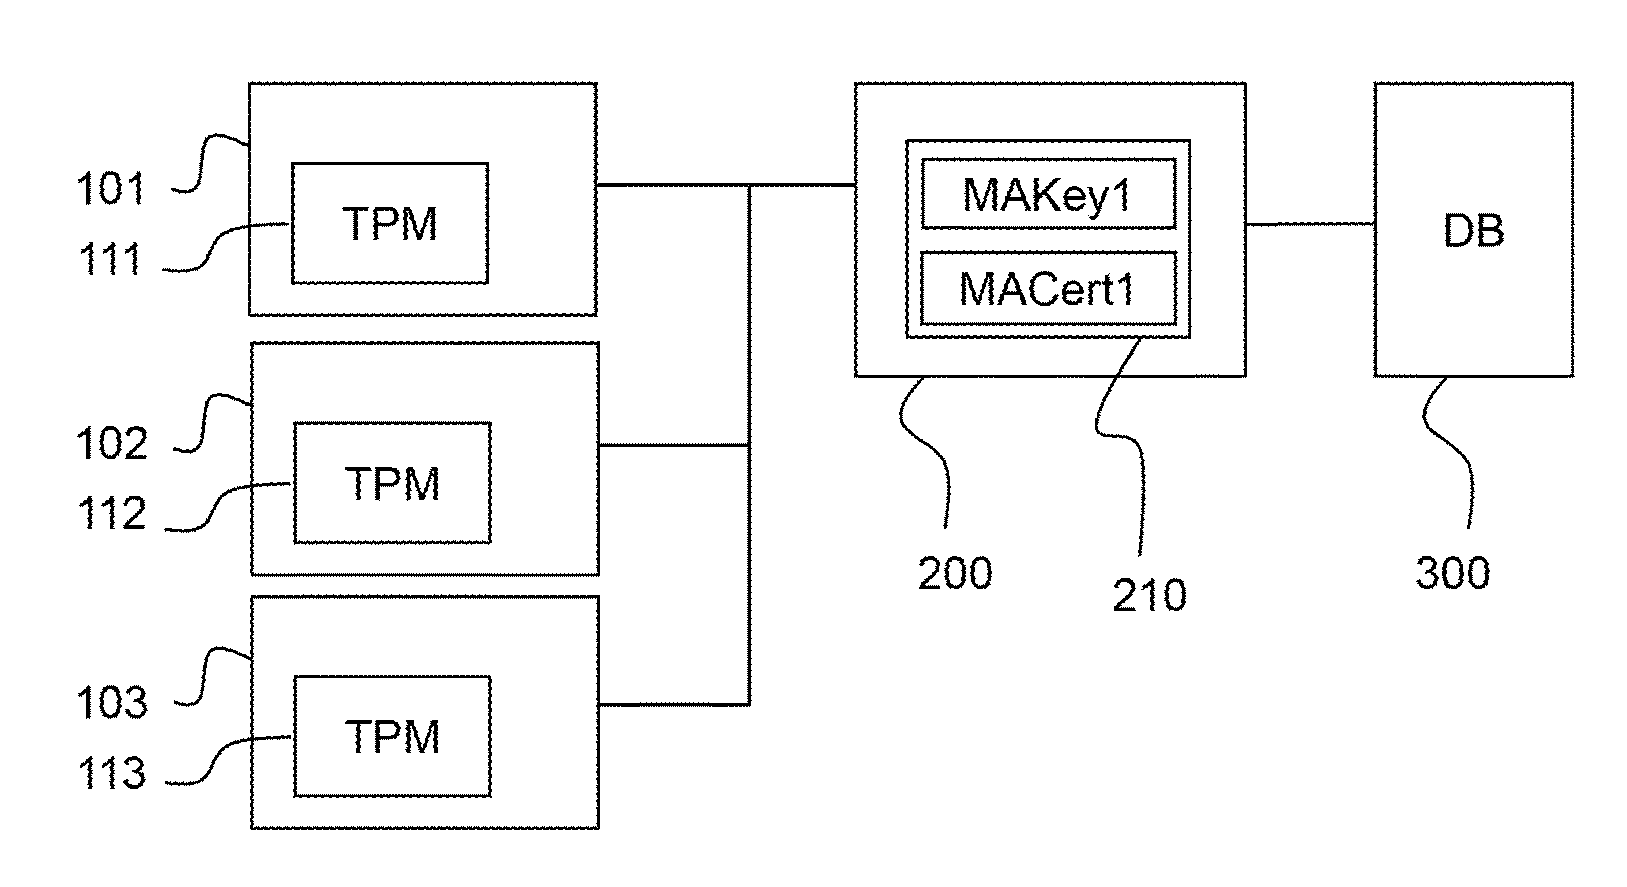 Method and system for creating and checking the validity of device certificates